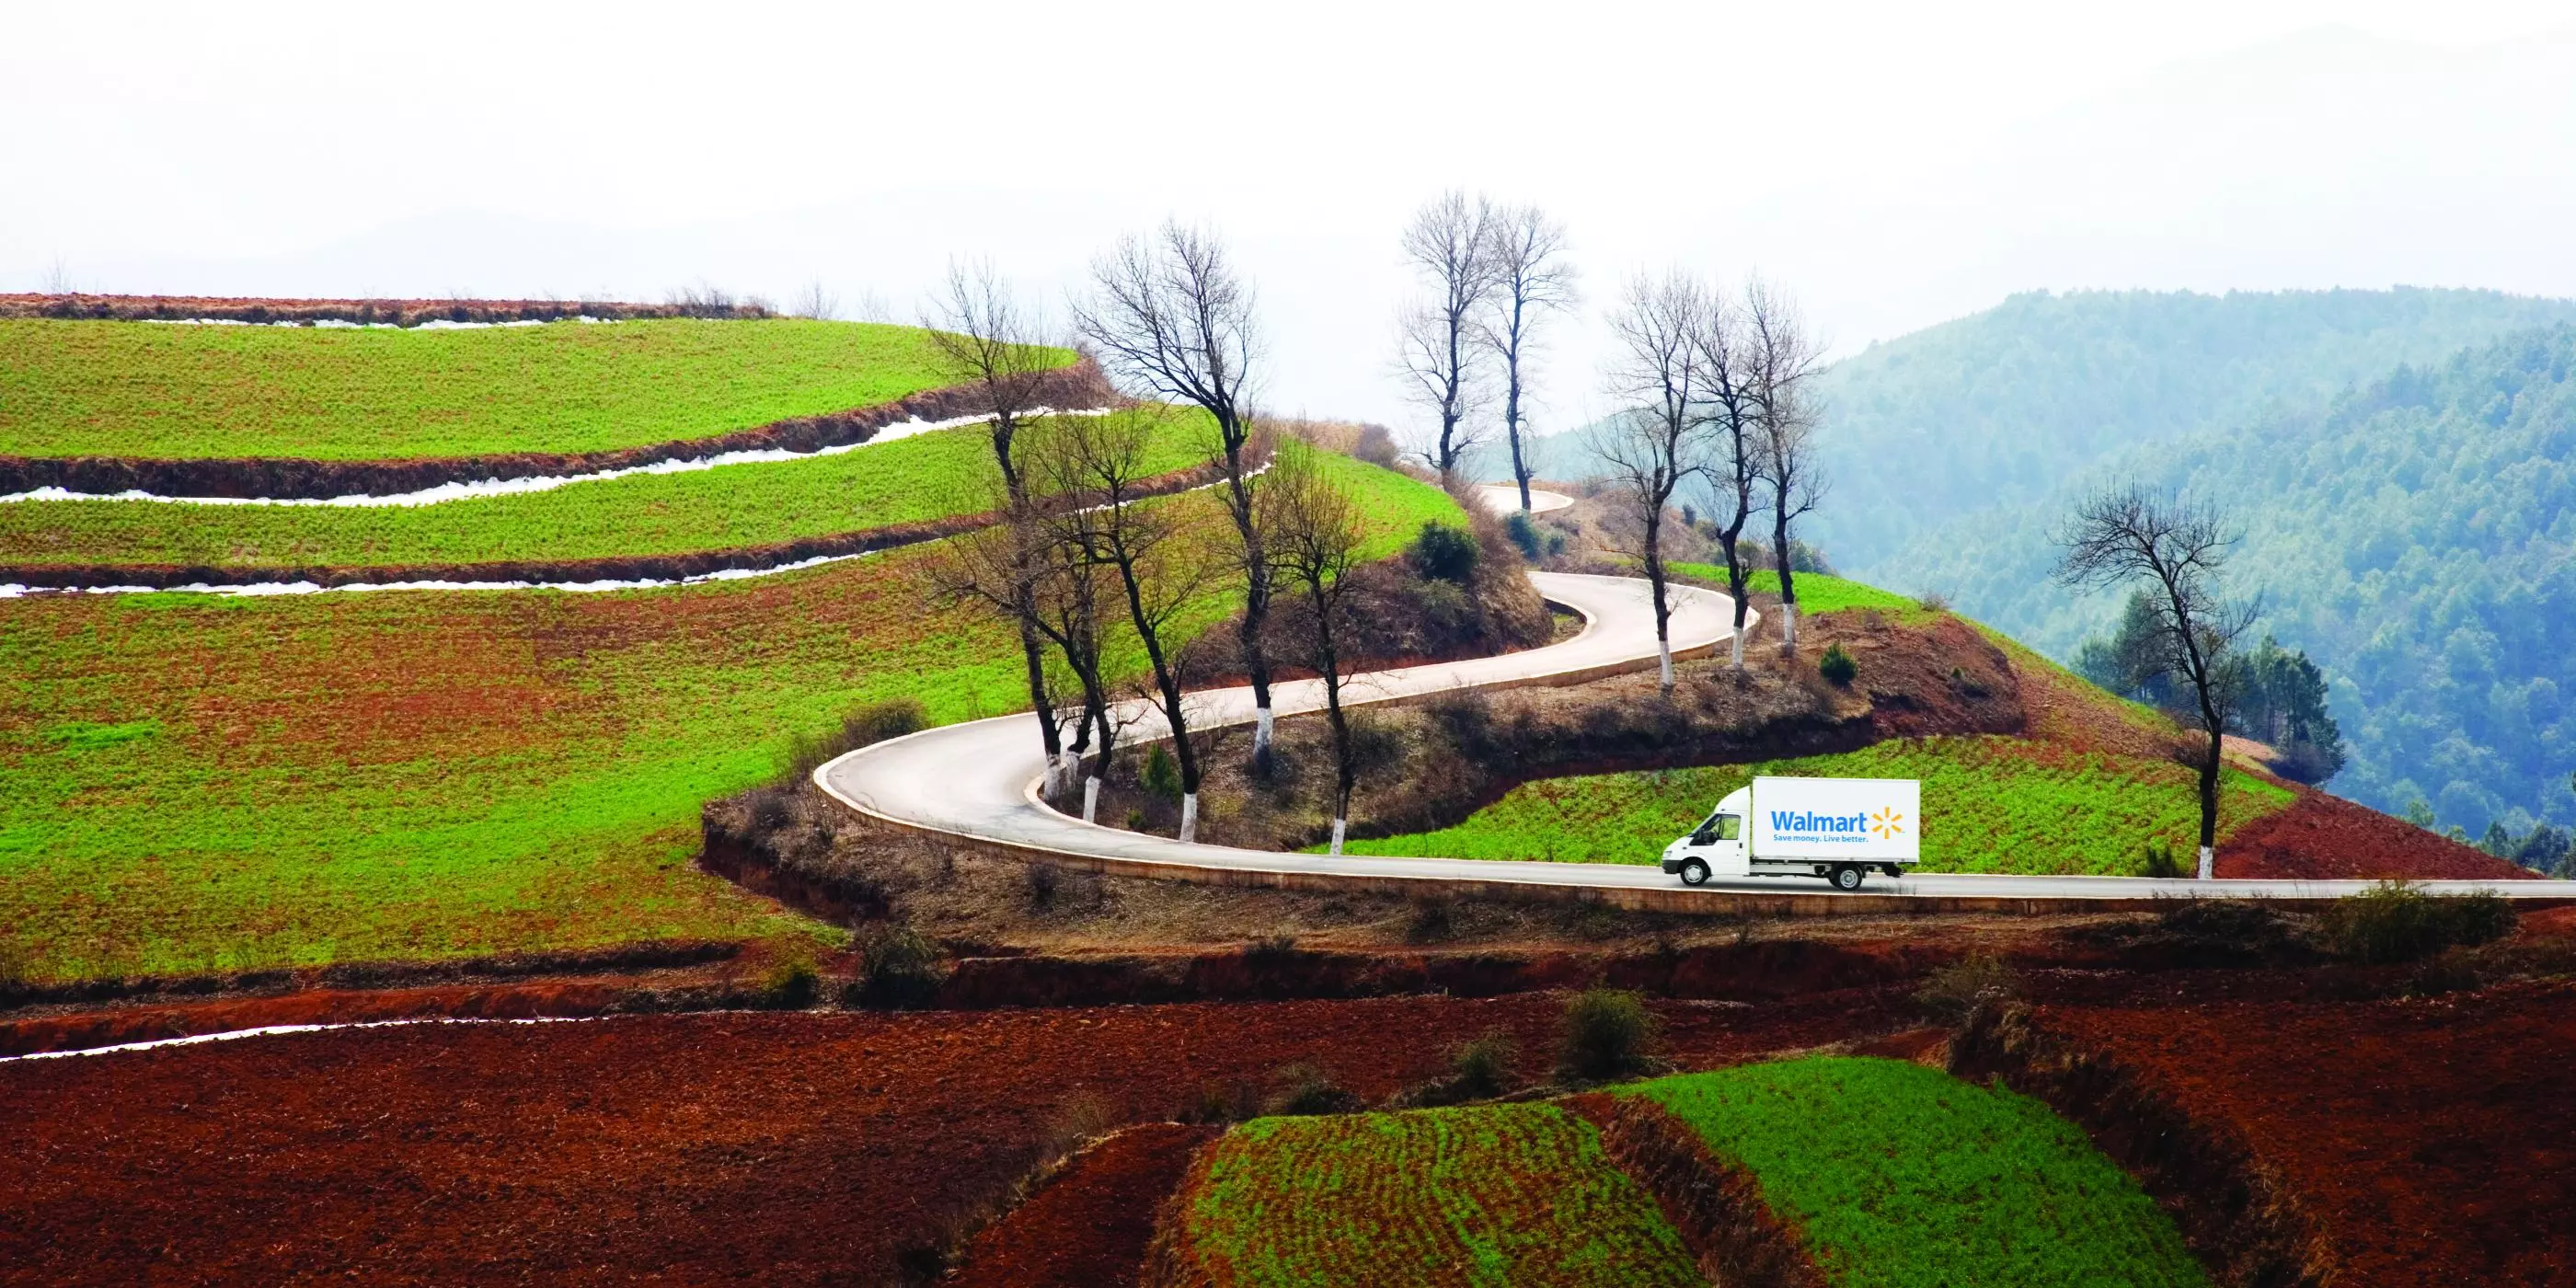 Walmart truck drives up a curved road in a scenic landscape.